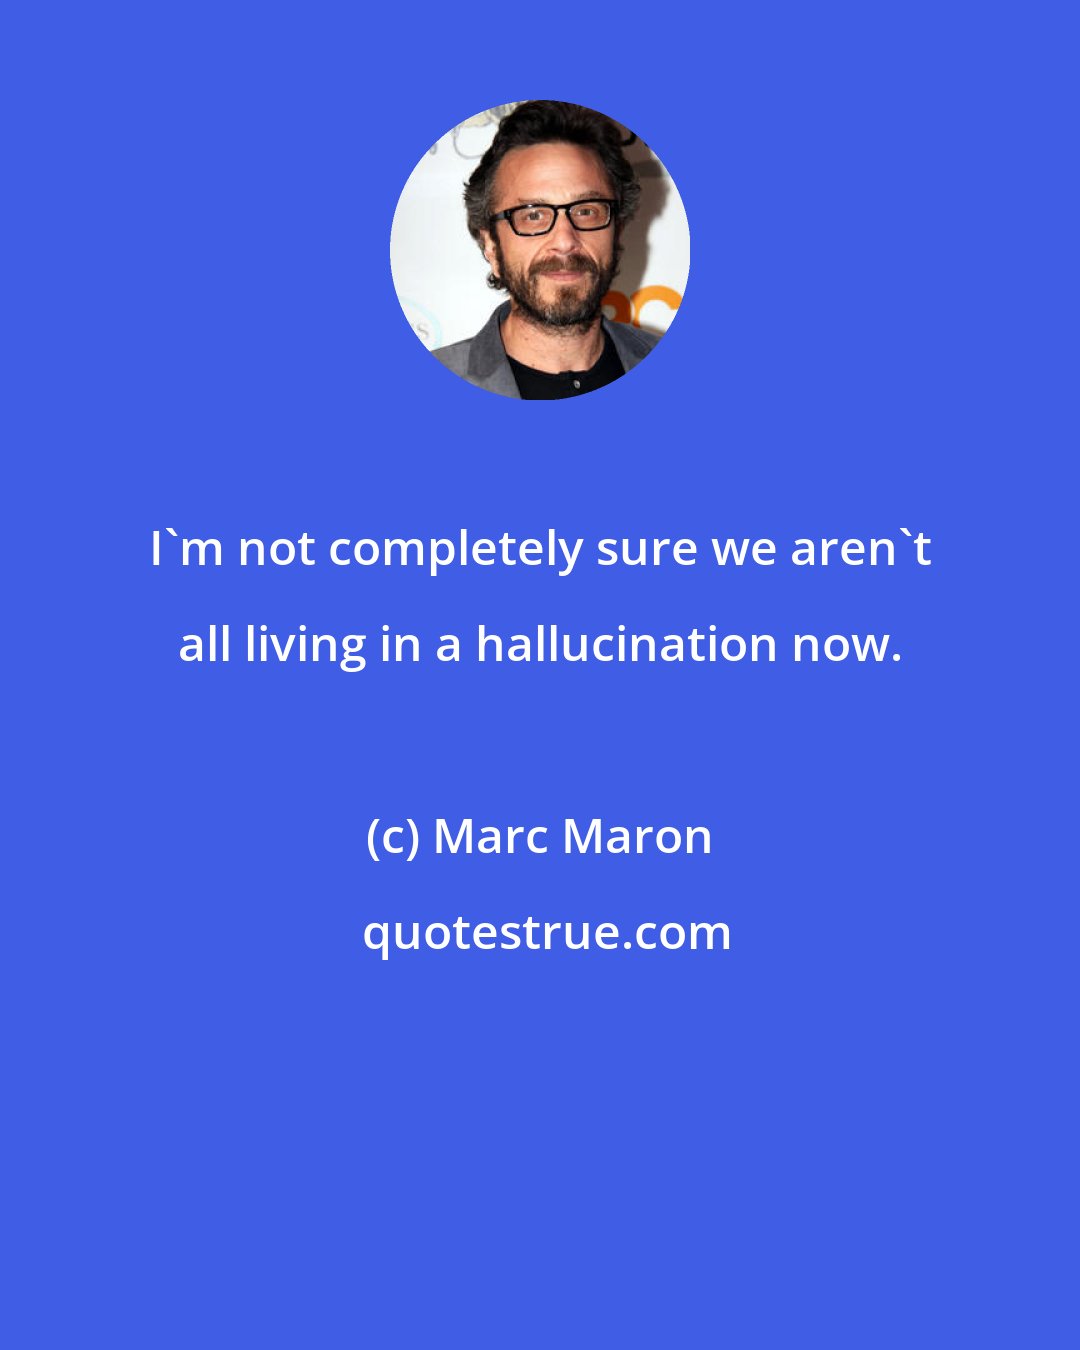 Marc Maron: I'm not completely sure we aren't all living in a hallucination now.